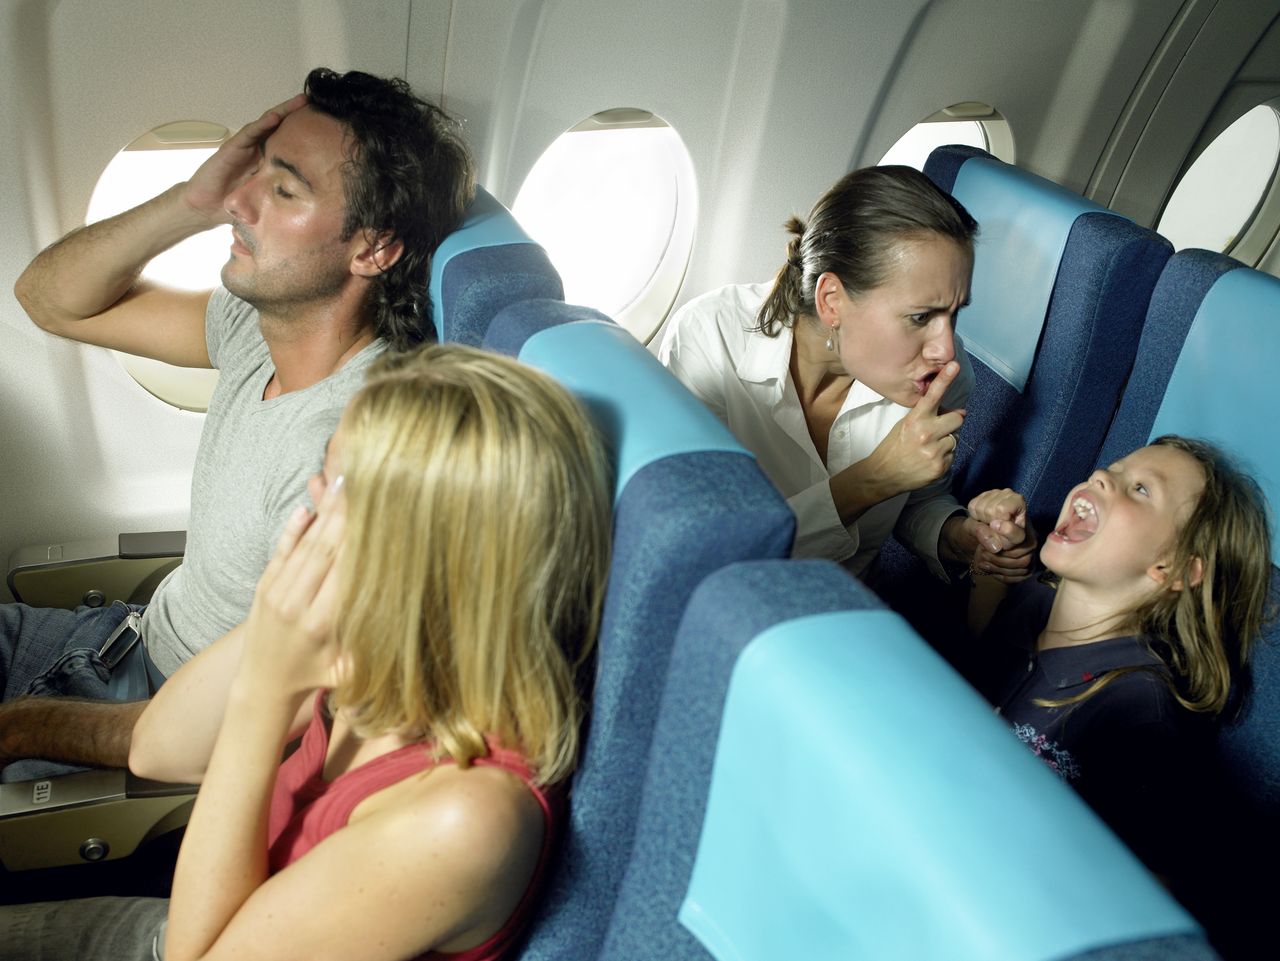 Airline introduces "adults-only zone," stirring debate on traveling with children